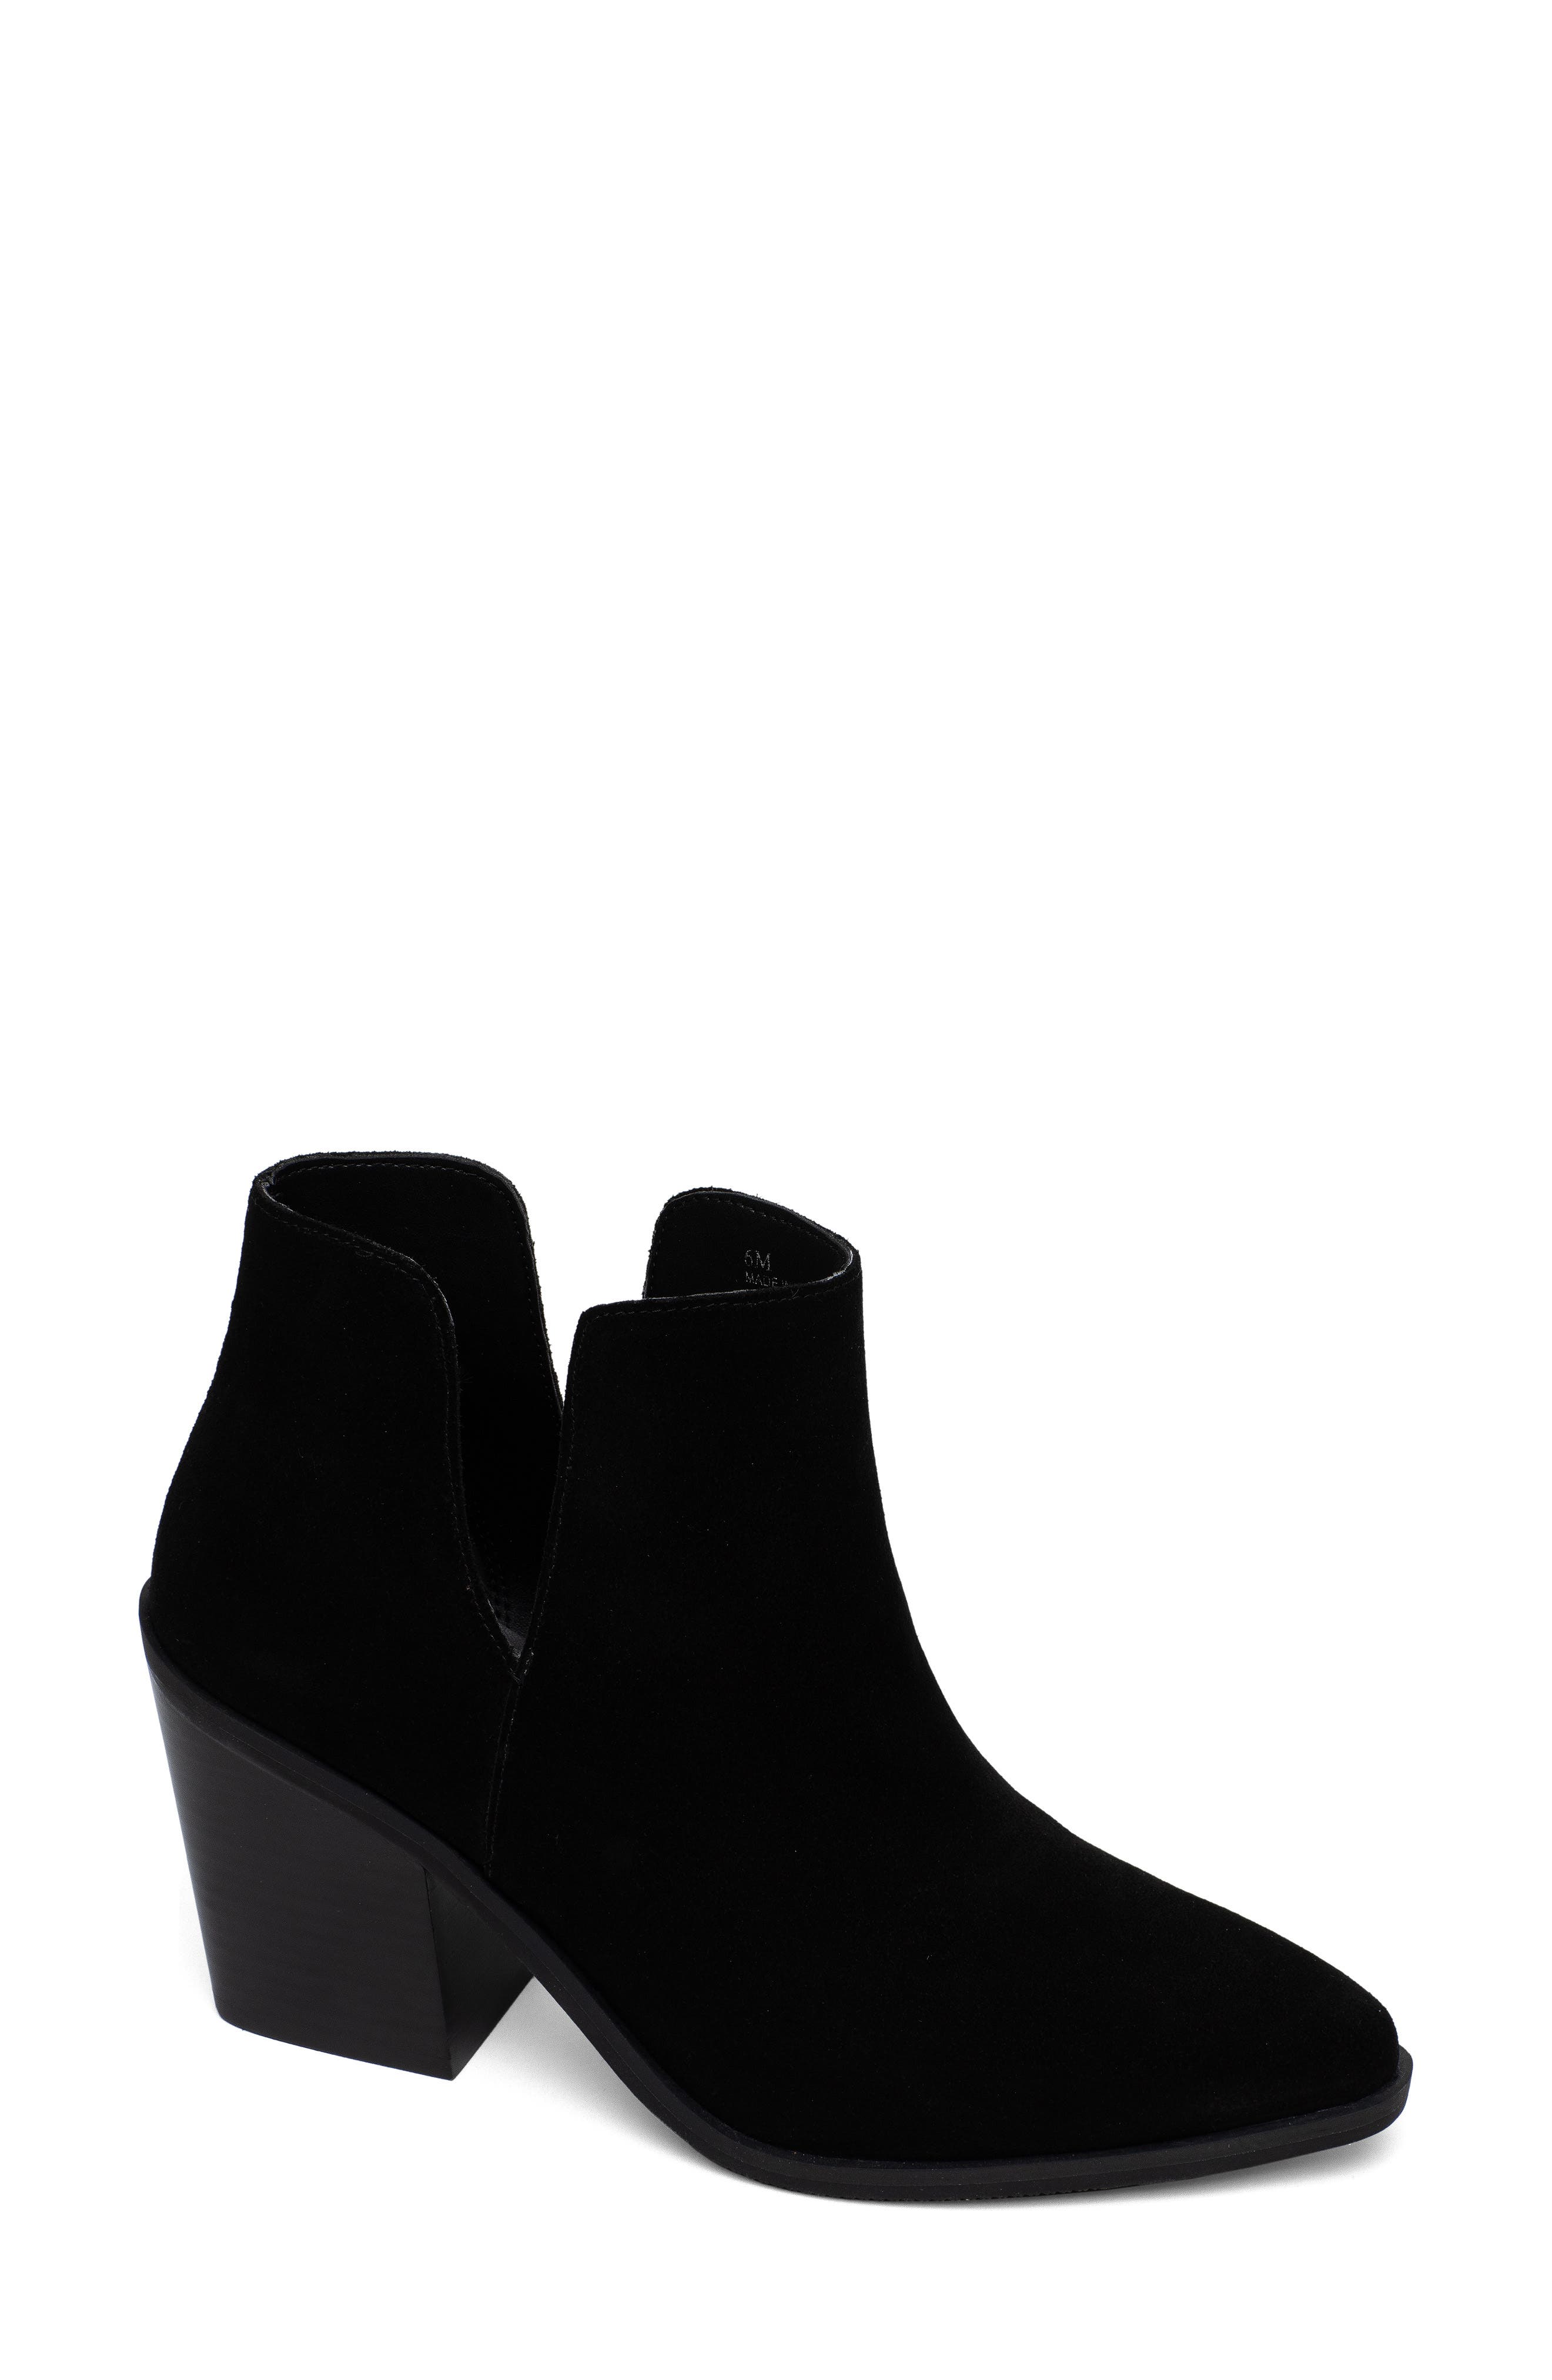 womens black boots suede